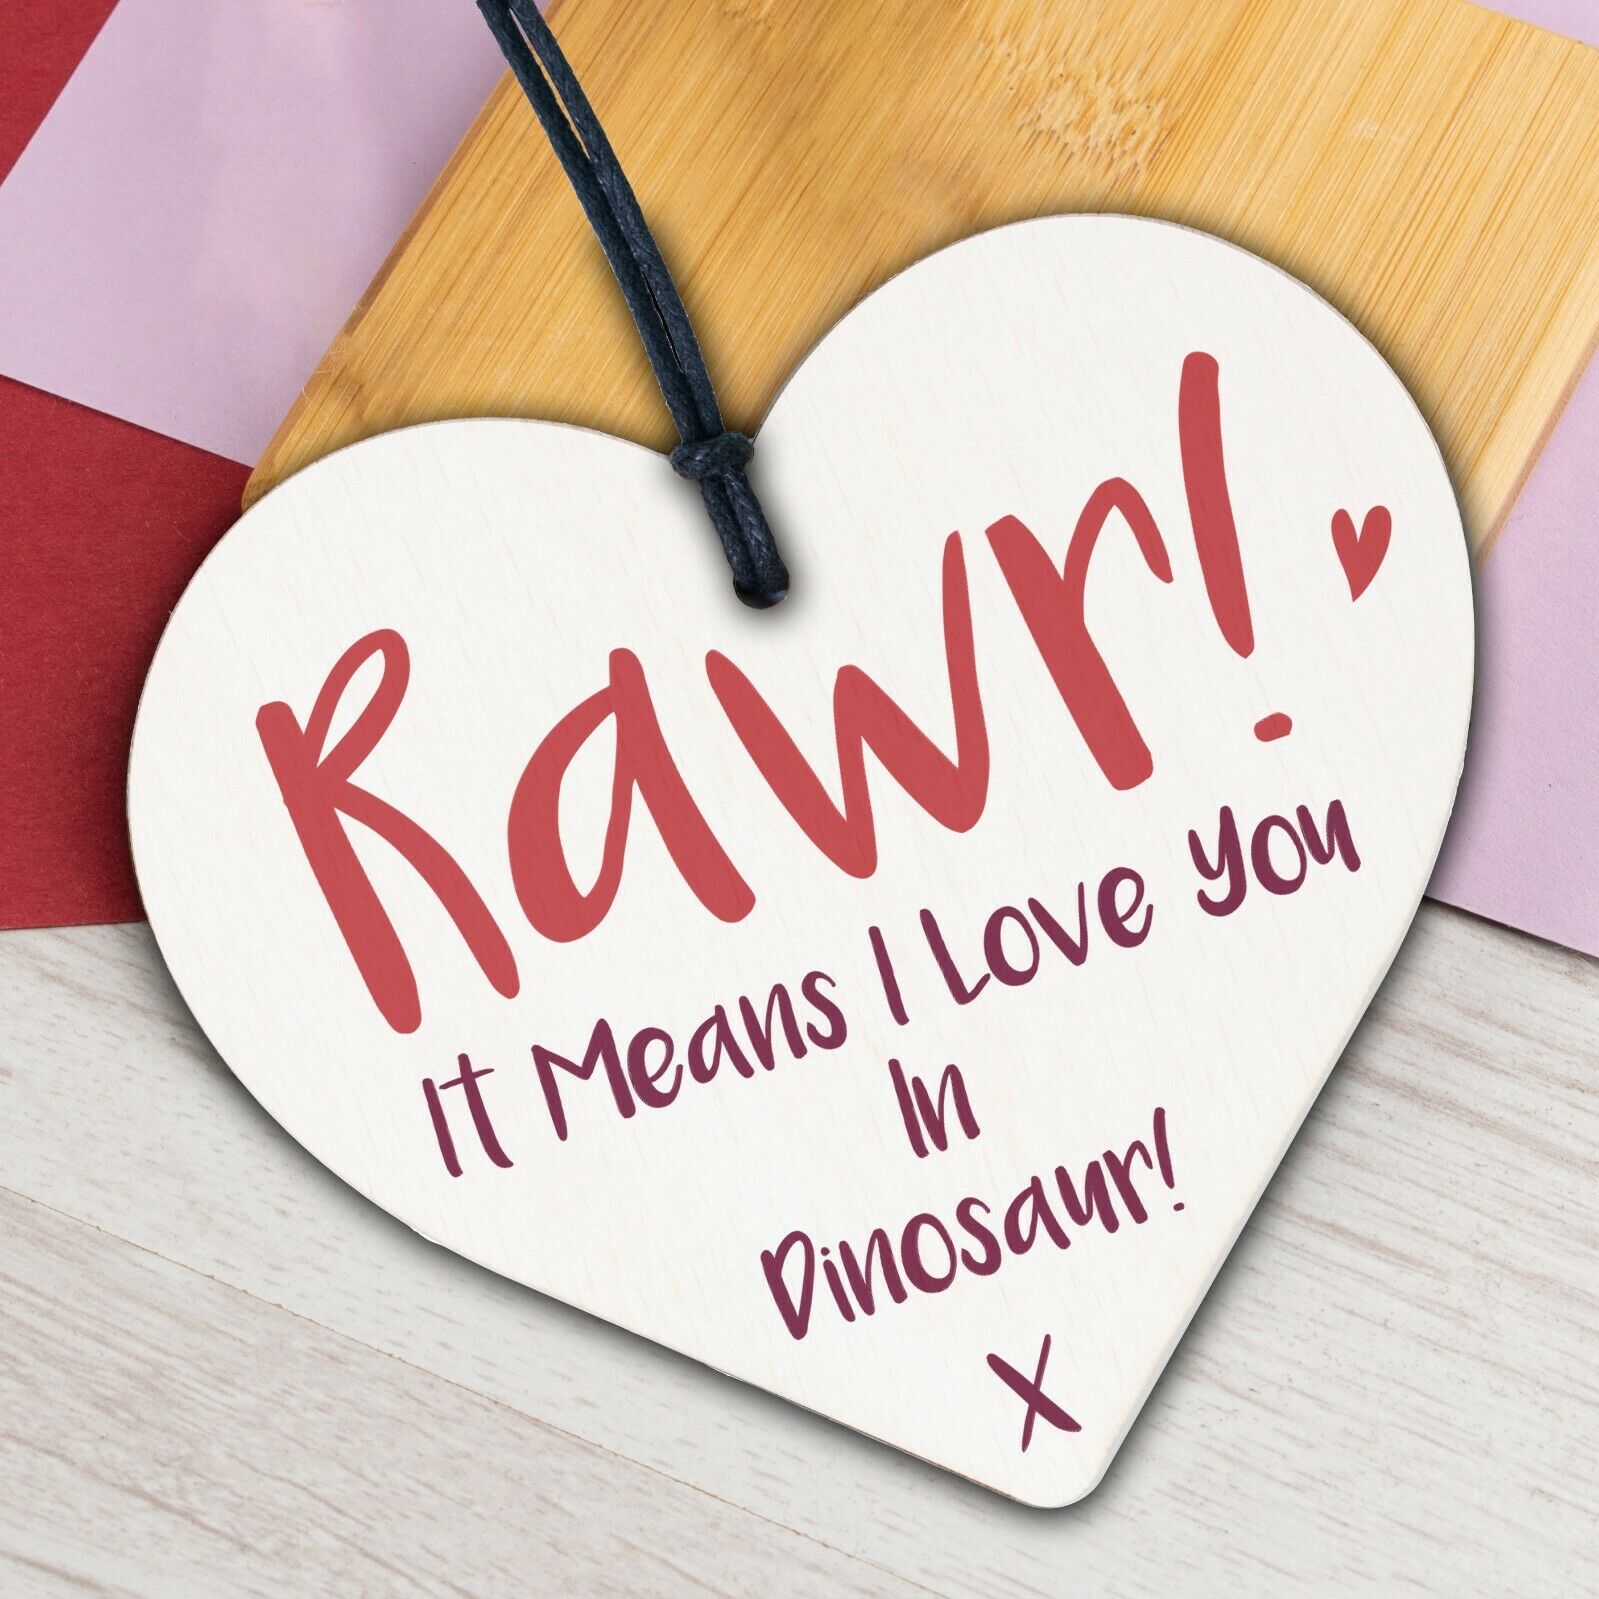 Rawr I Love You Novelty Wooden Hanging Heart Plaque Funny Valentines Day Gift